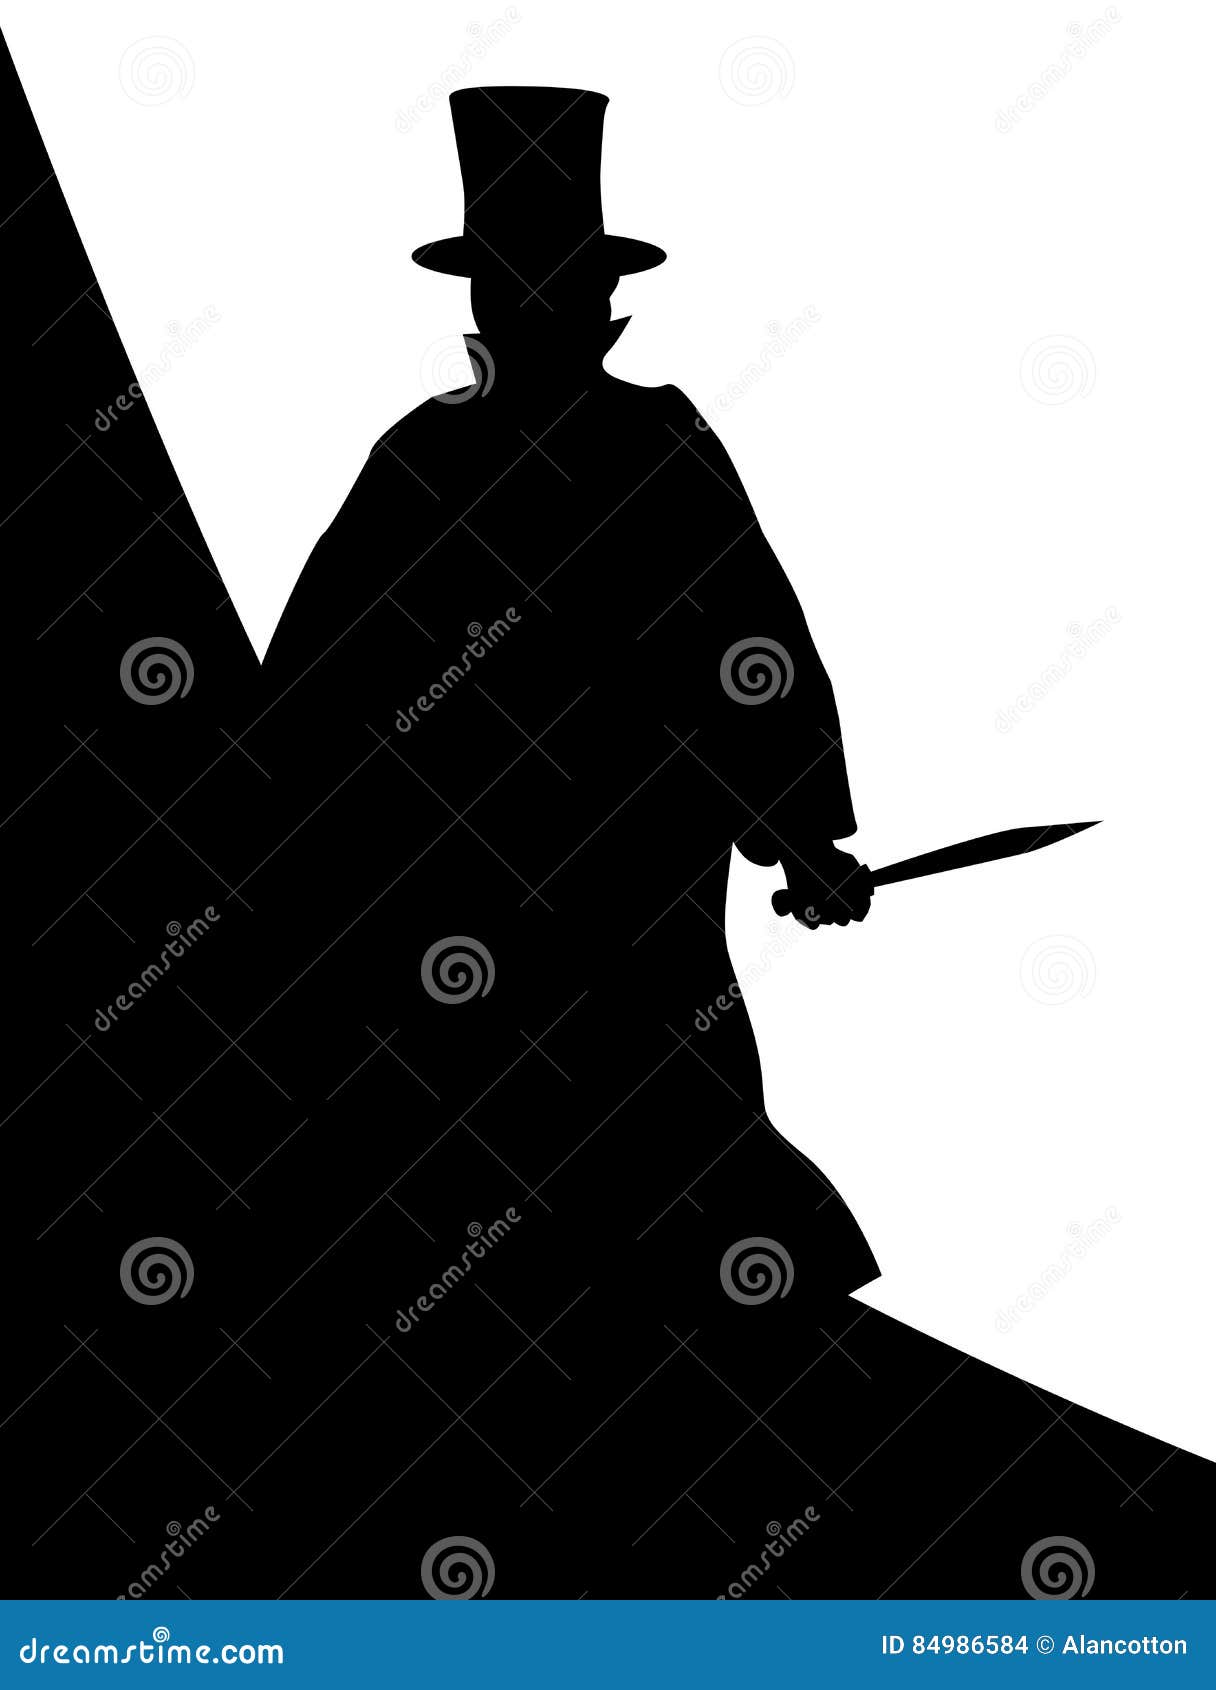 jack the ripper background silhouette